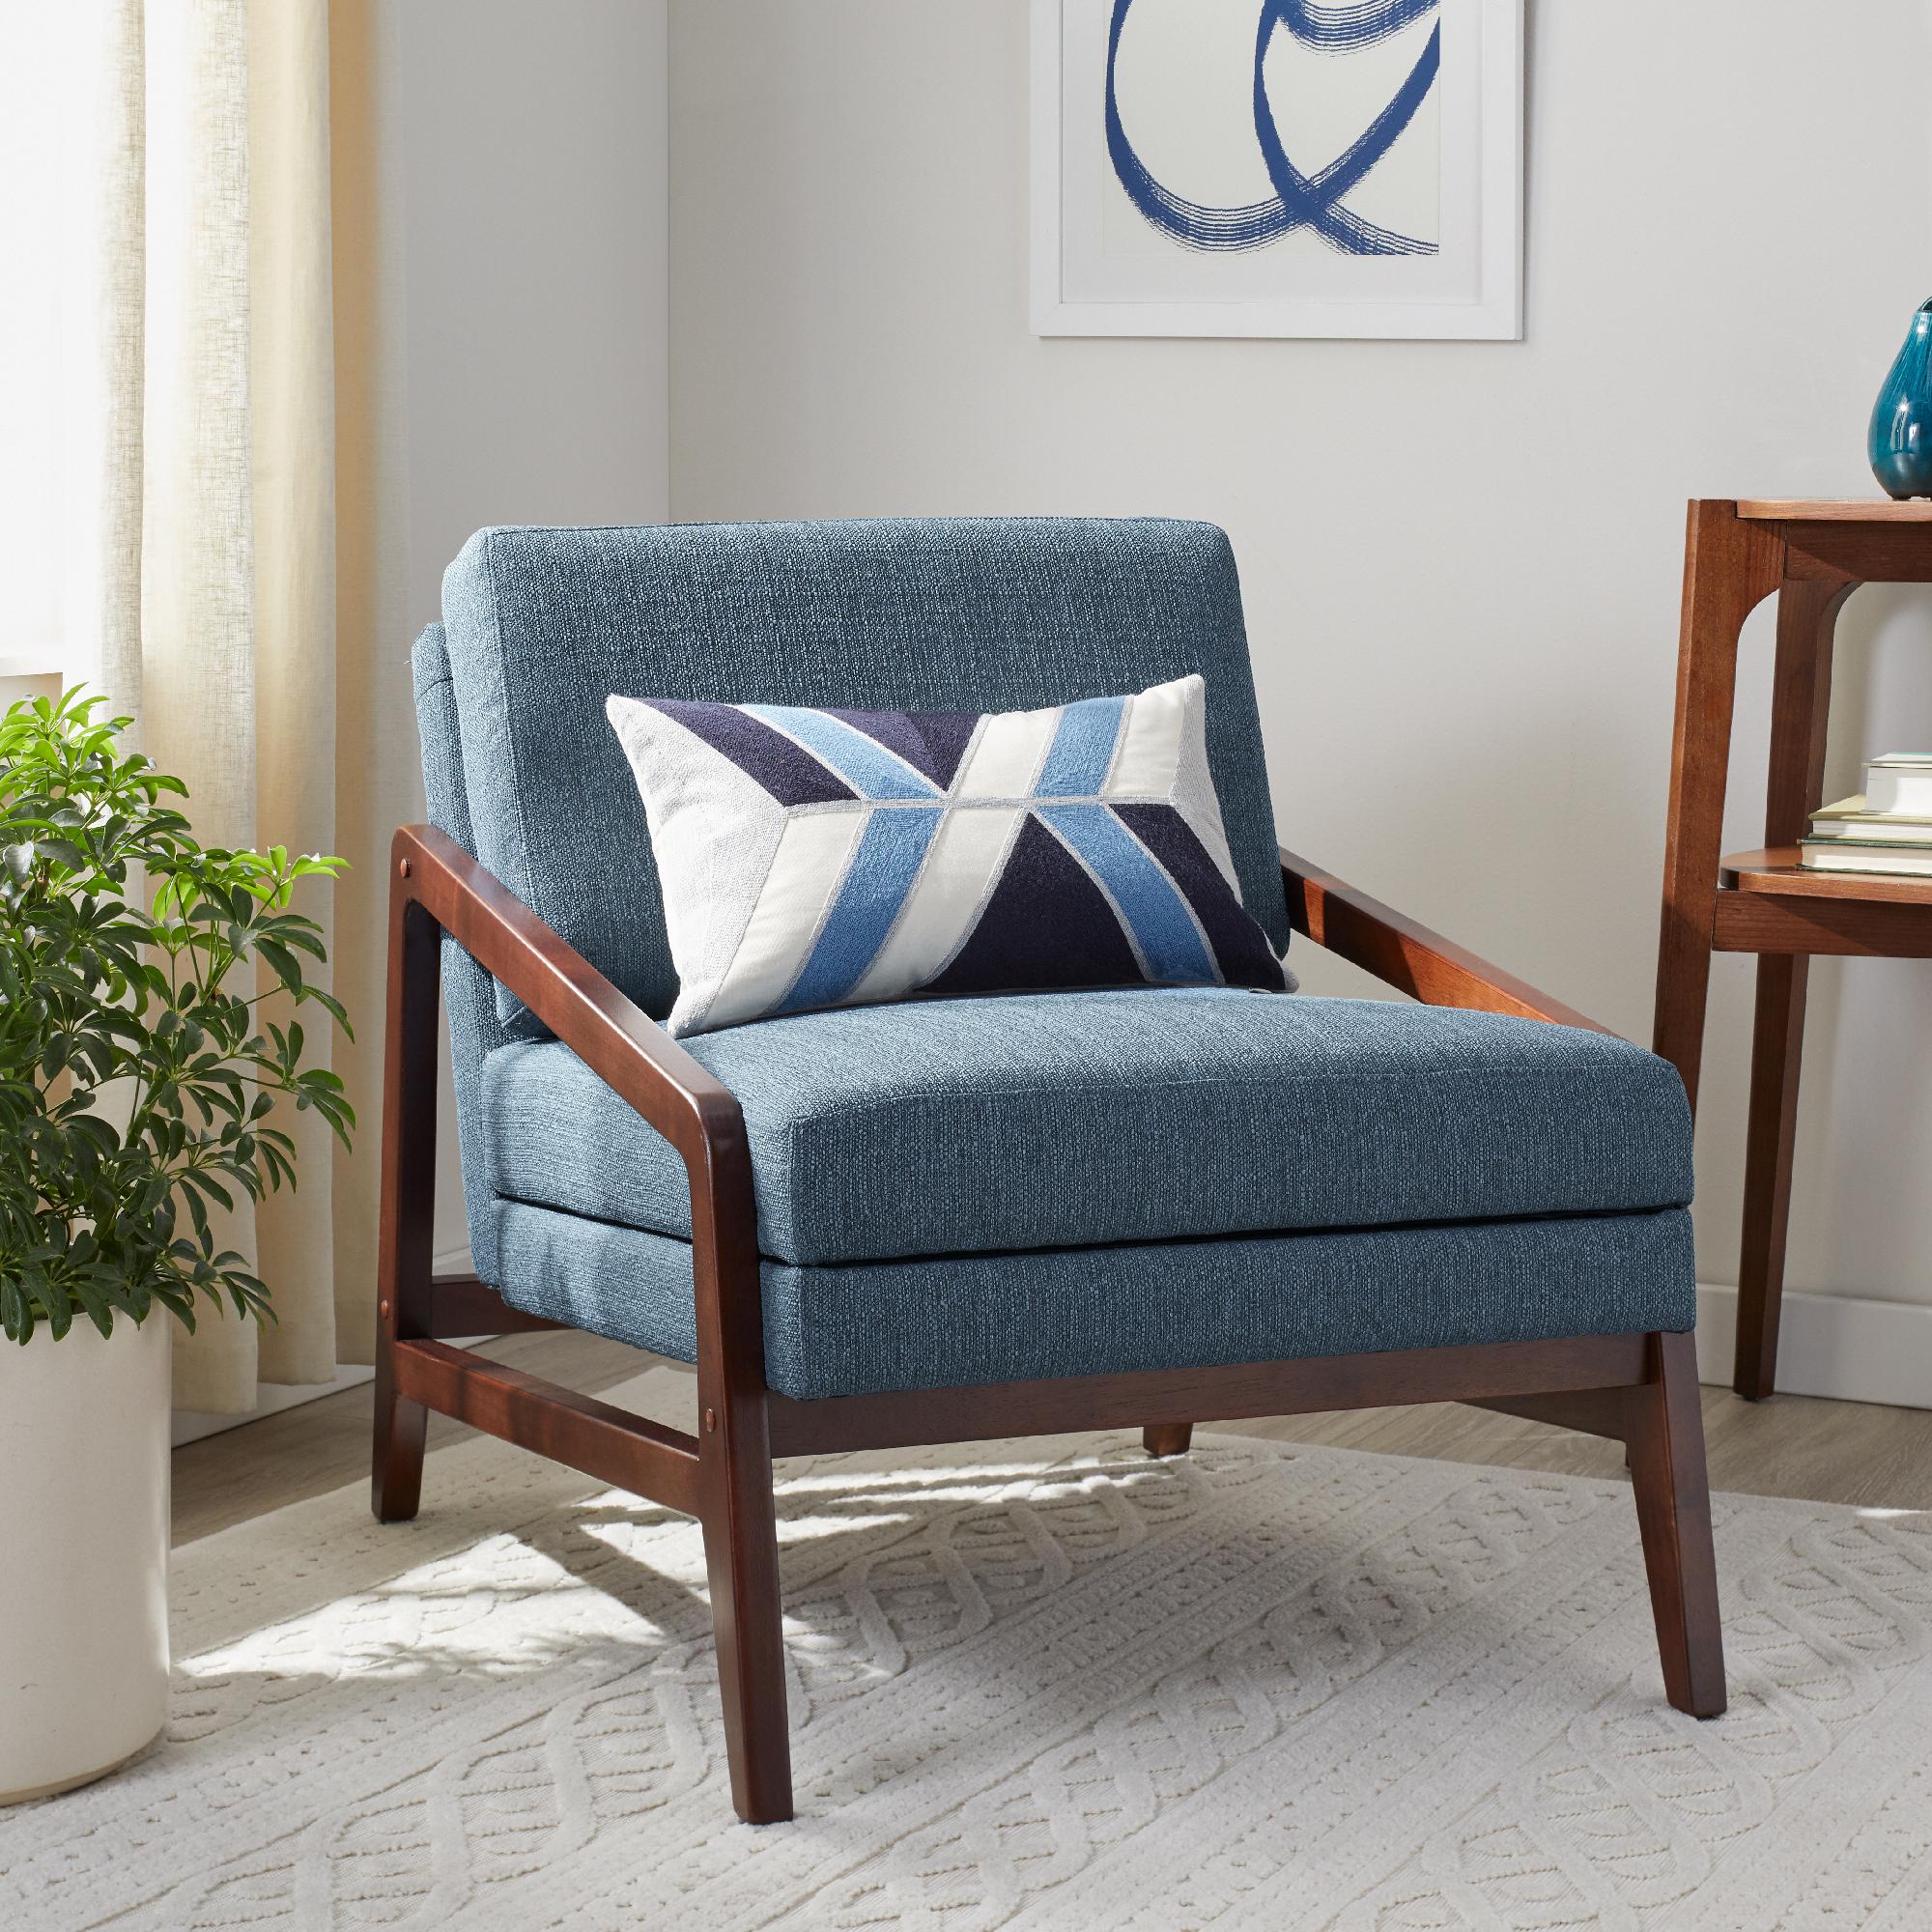 save an extra 10% on Select Living Room Furniture*